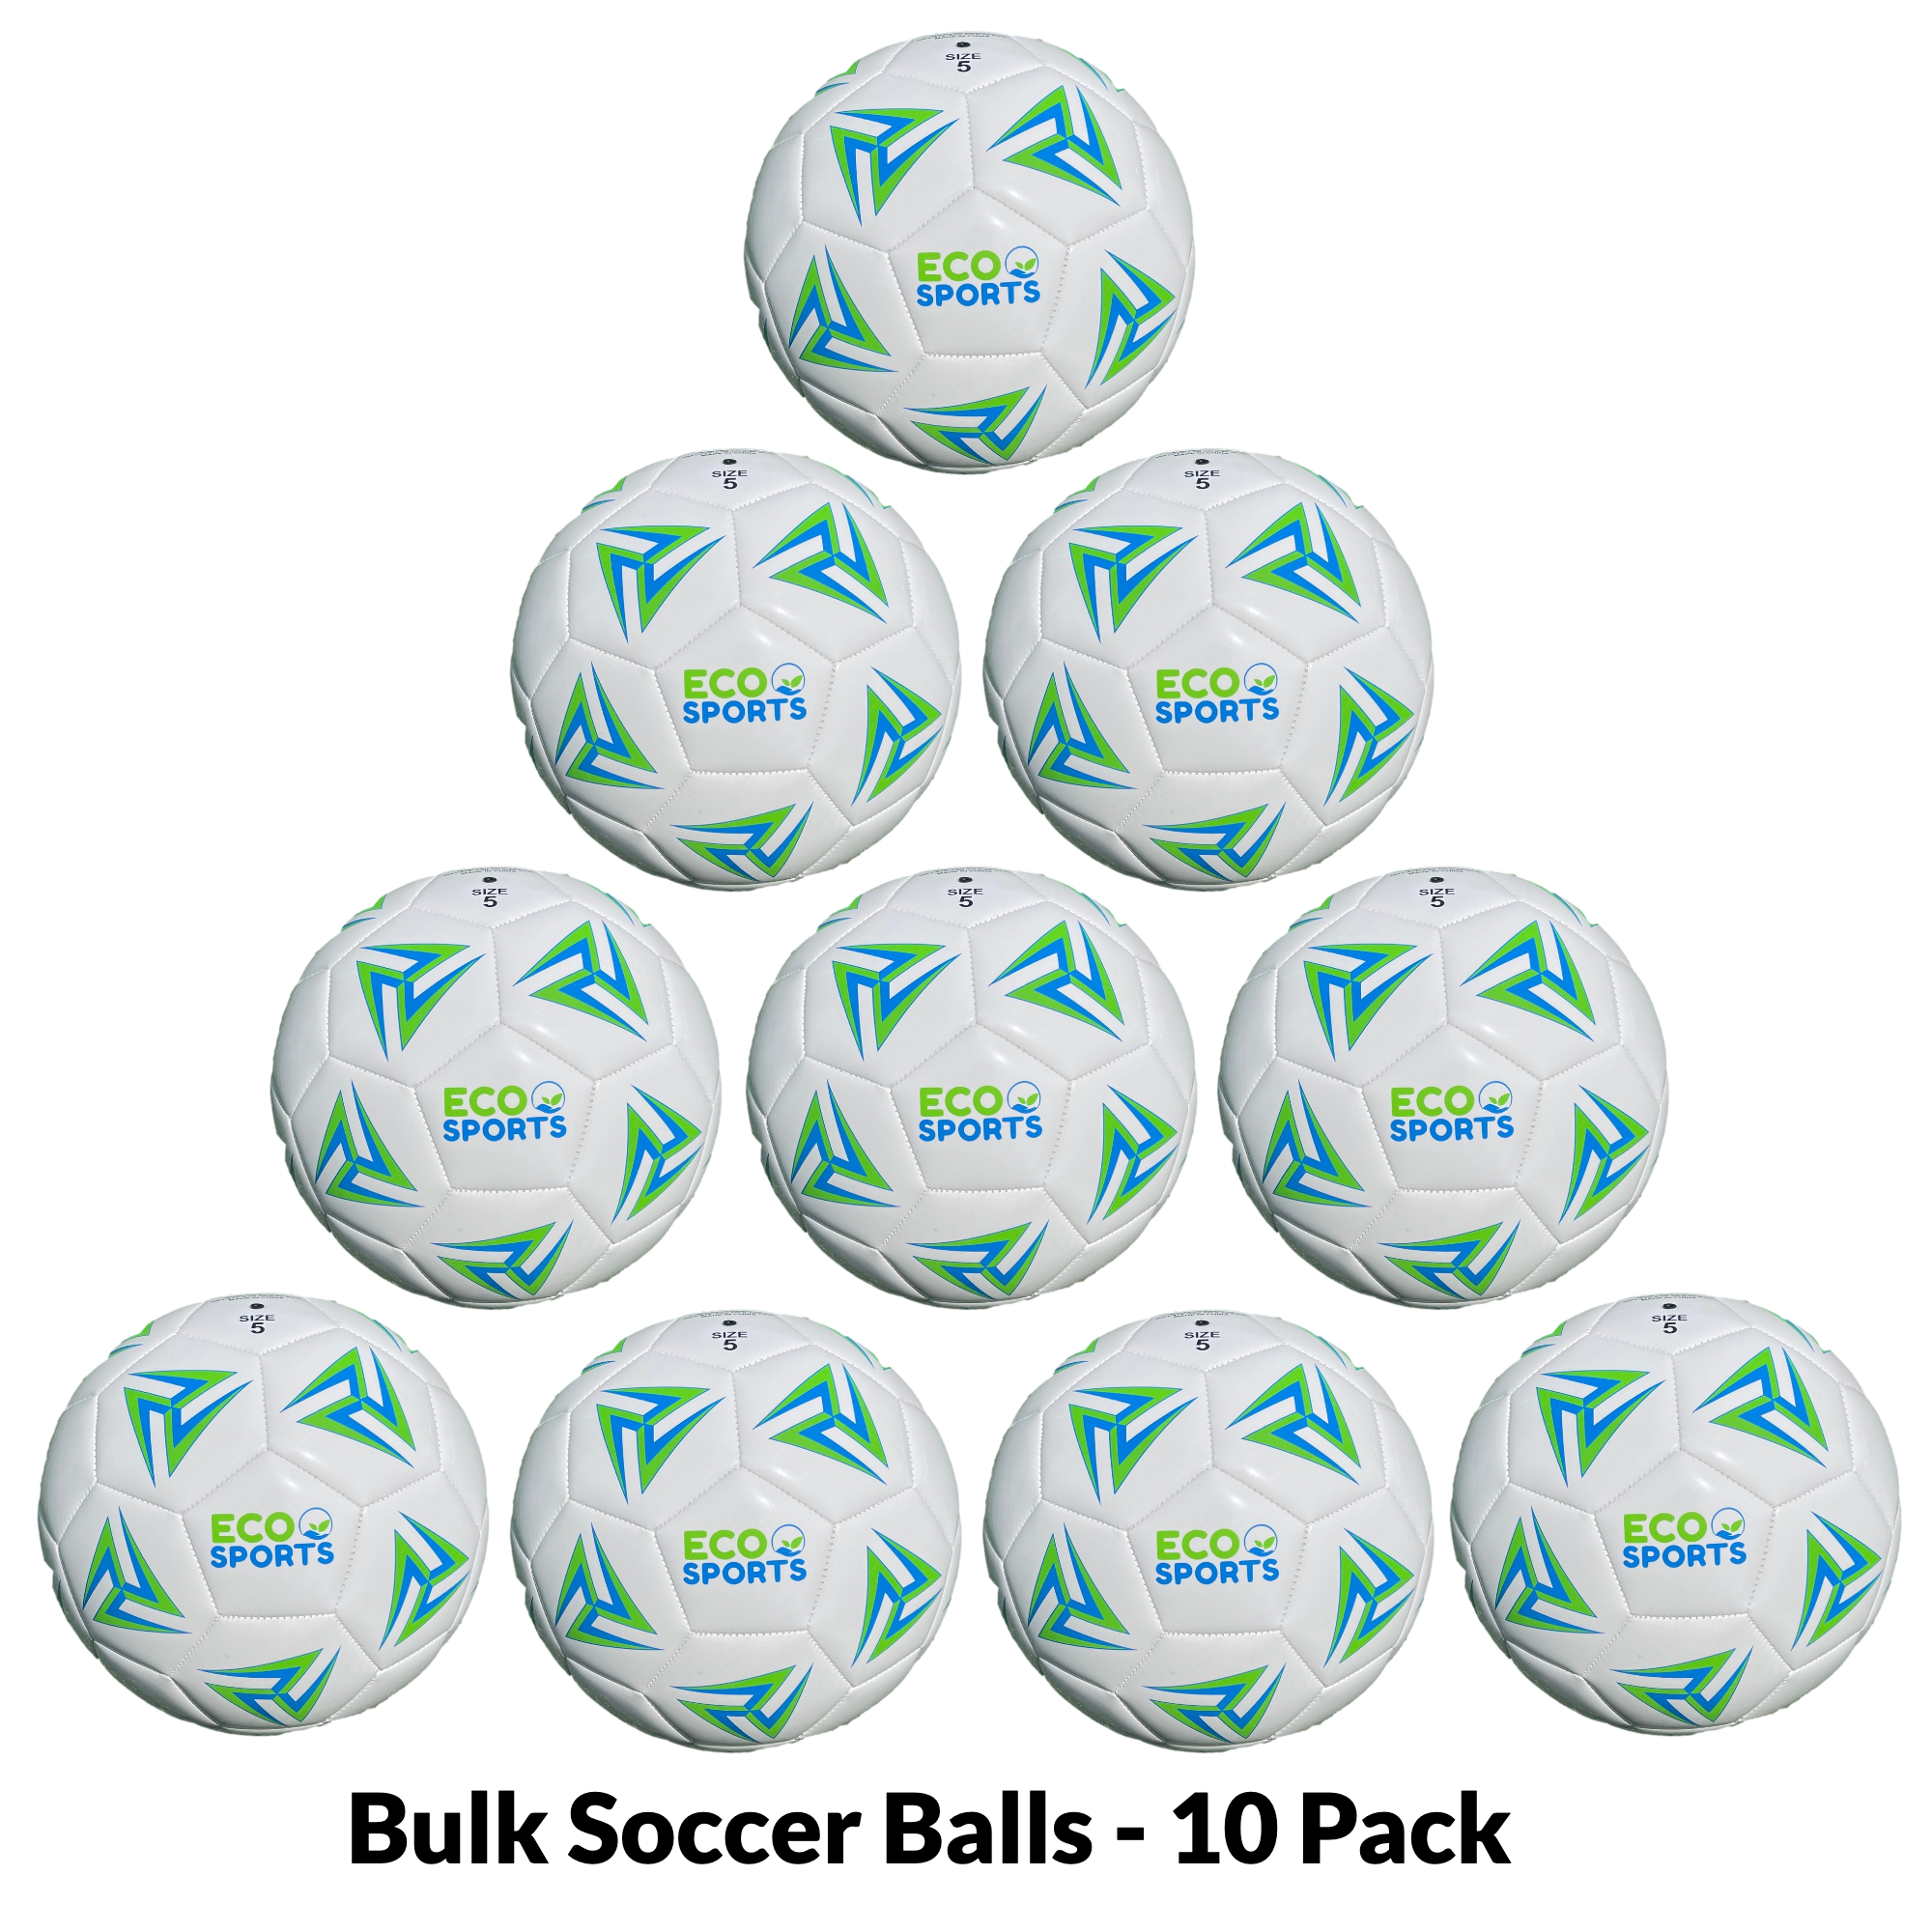 How To Choose A Soccer Ball - Size Guide & Weight For All Soccer